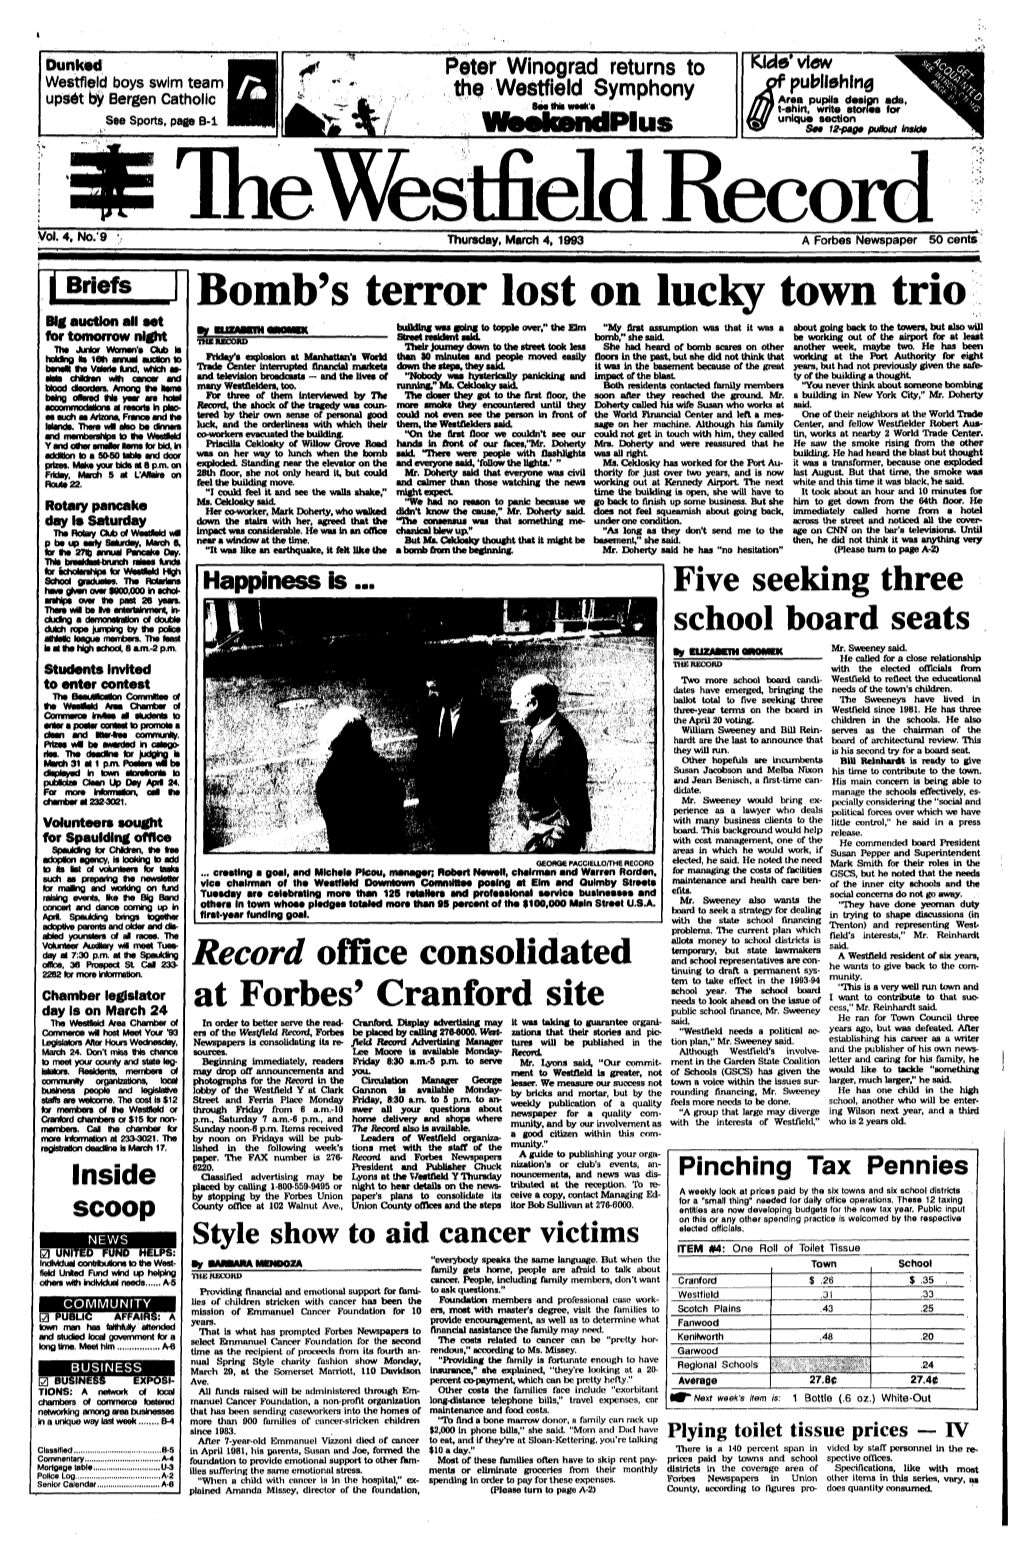 Bomb's Terror Lost on Lucky Town Trio